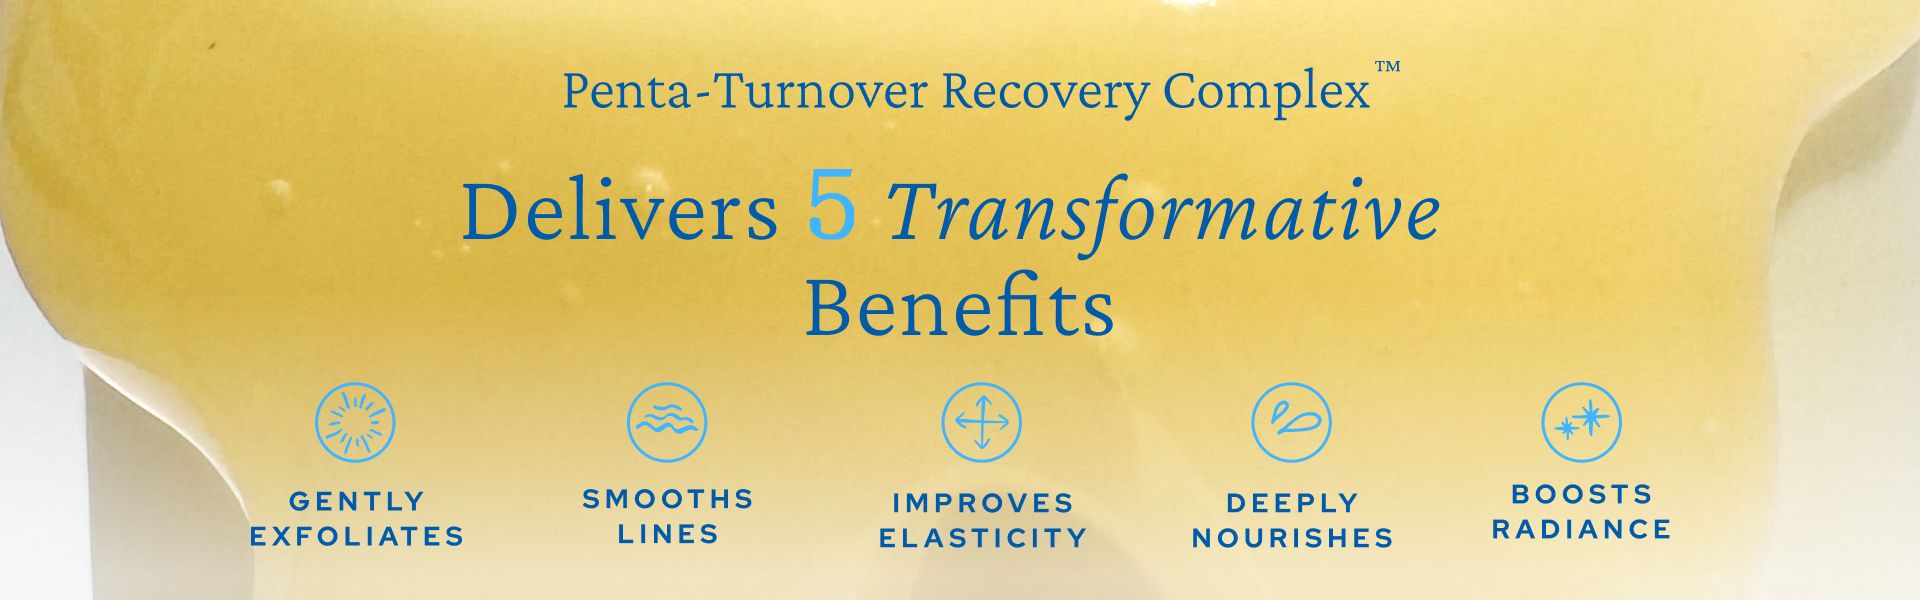 Image with text promoting a Penta-Turnover Recovery Complex product. The text reads: "Delivers 5 Transformative Benefits". The benefits listed are: "Gently Exfoliates, Smooths Lines, Improves Elasticity, Deeply Nourishes, Boosts Radiance", each with corresponding icons.